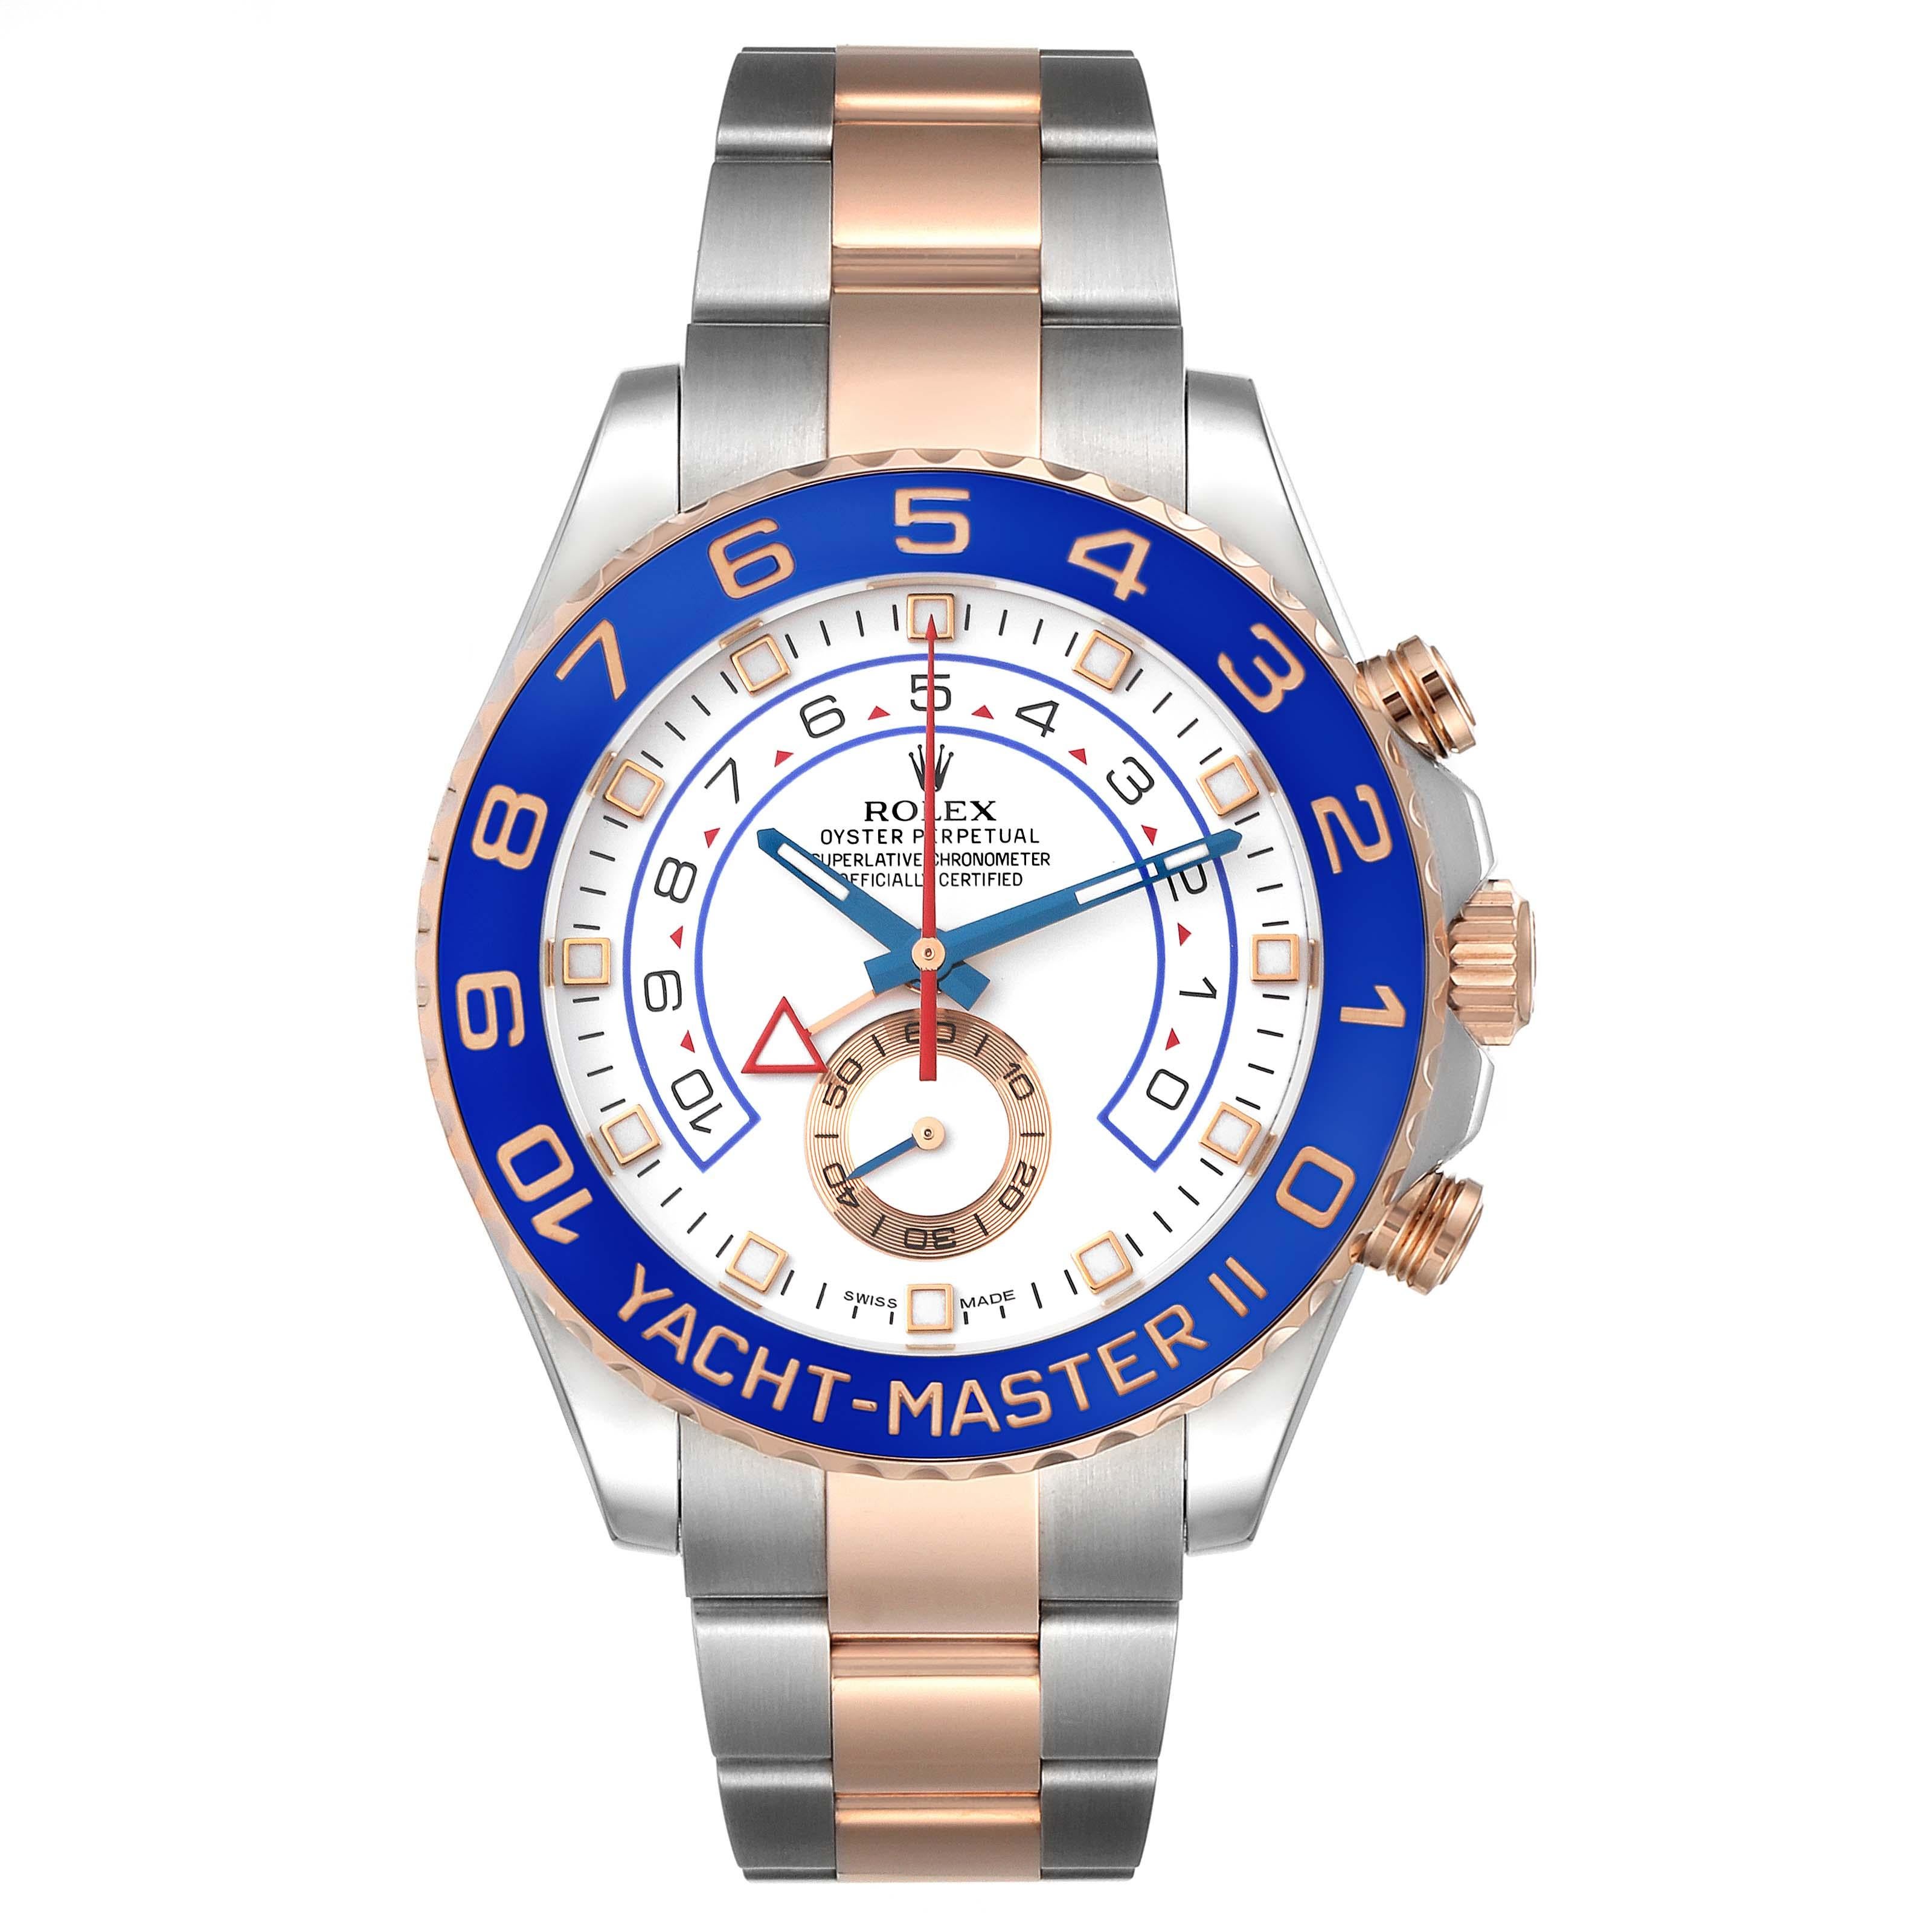 Rolex Yachtmaster II Steel Rose Gold Mens Watch 116681 Box Card For Sale 1